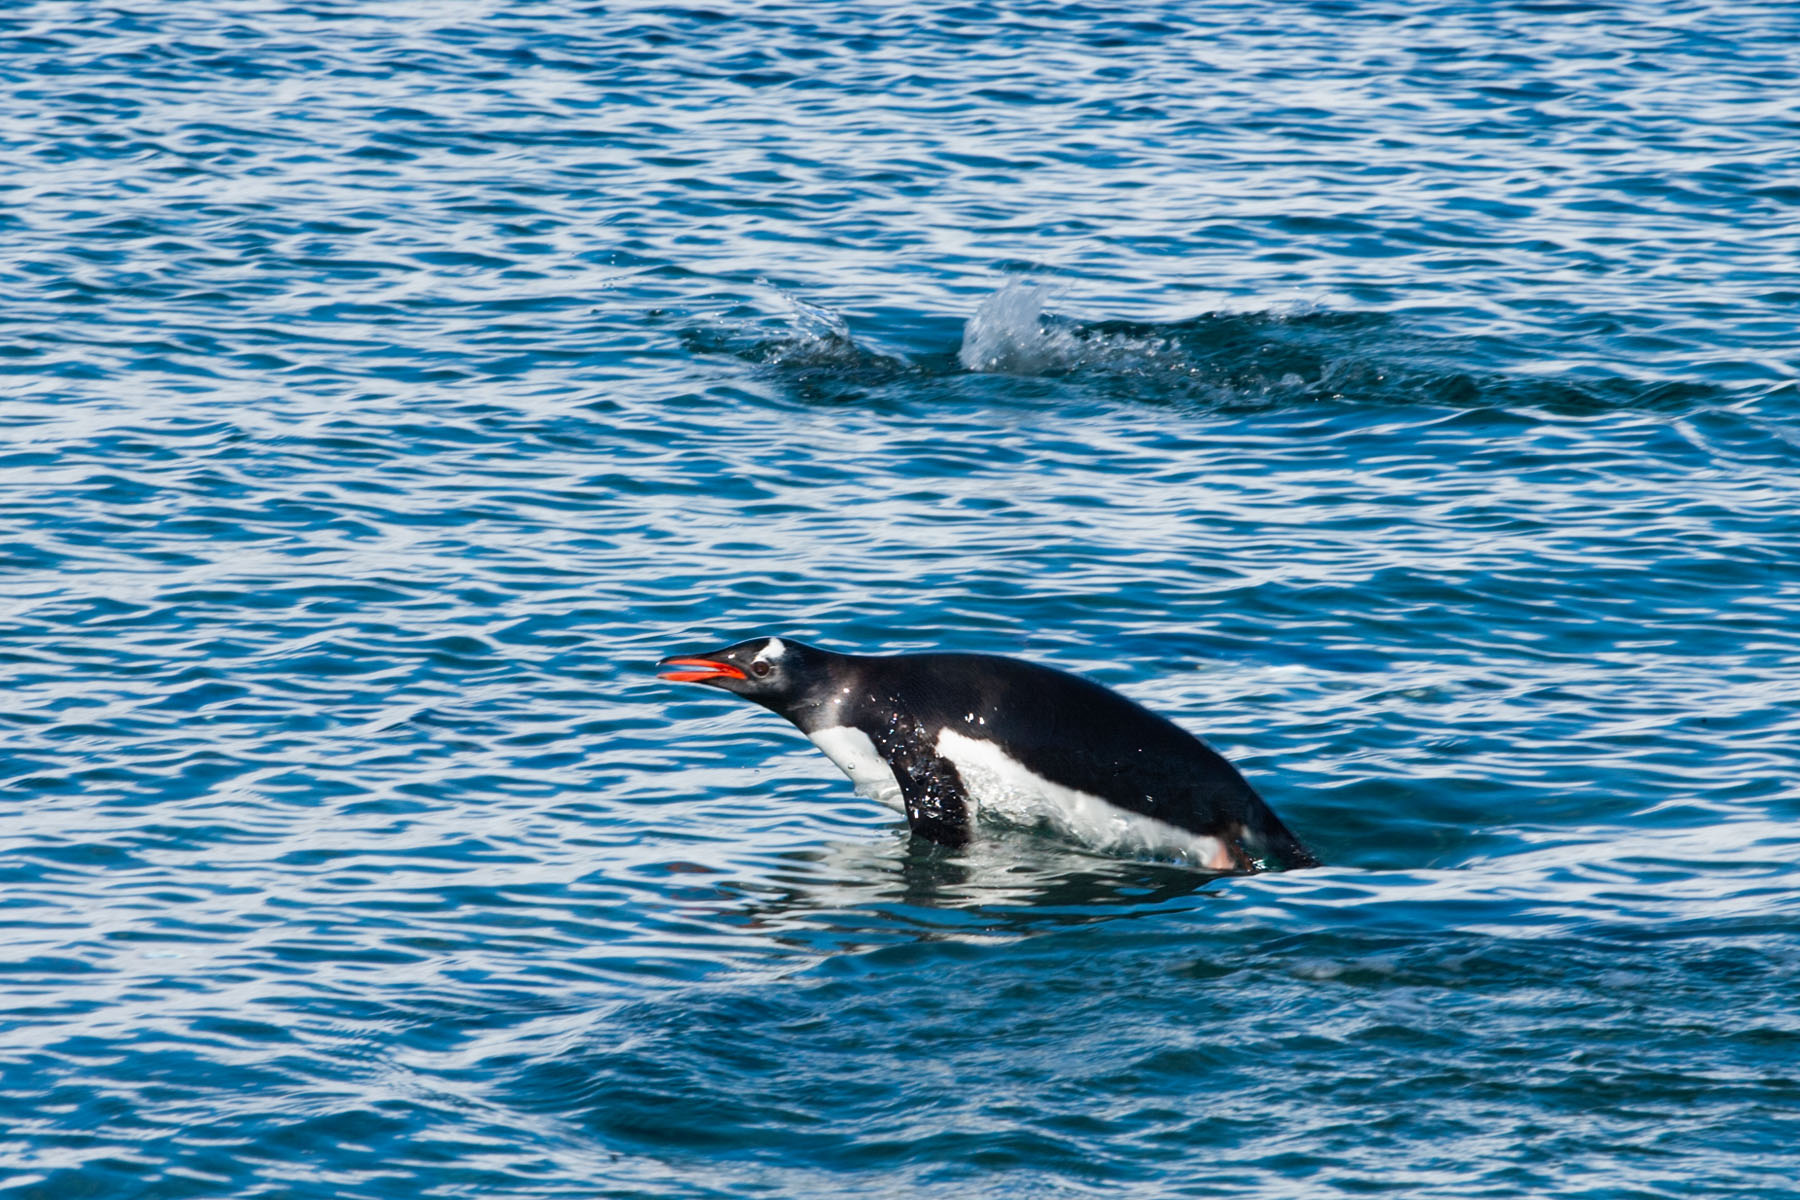 Gentoo flying through the water, Neko Harbor on the Antarctic continent.  Click for next photo.